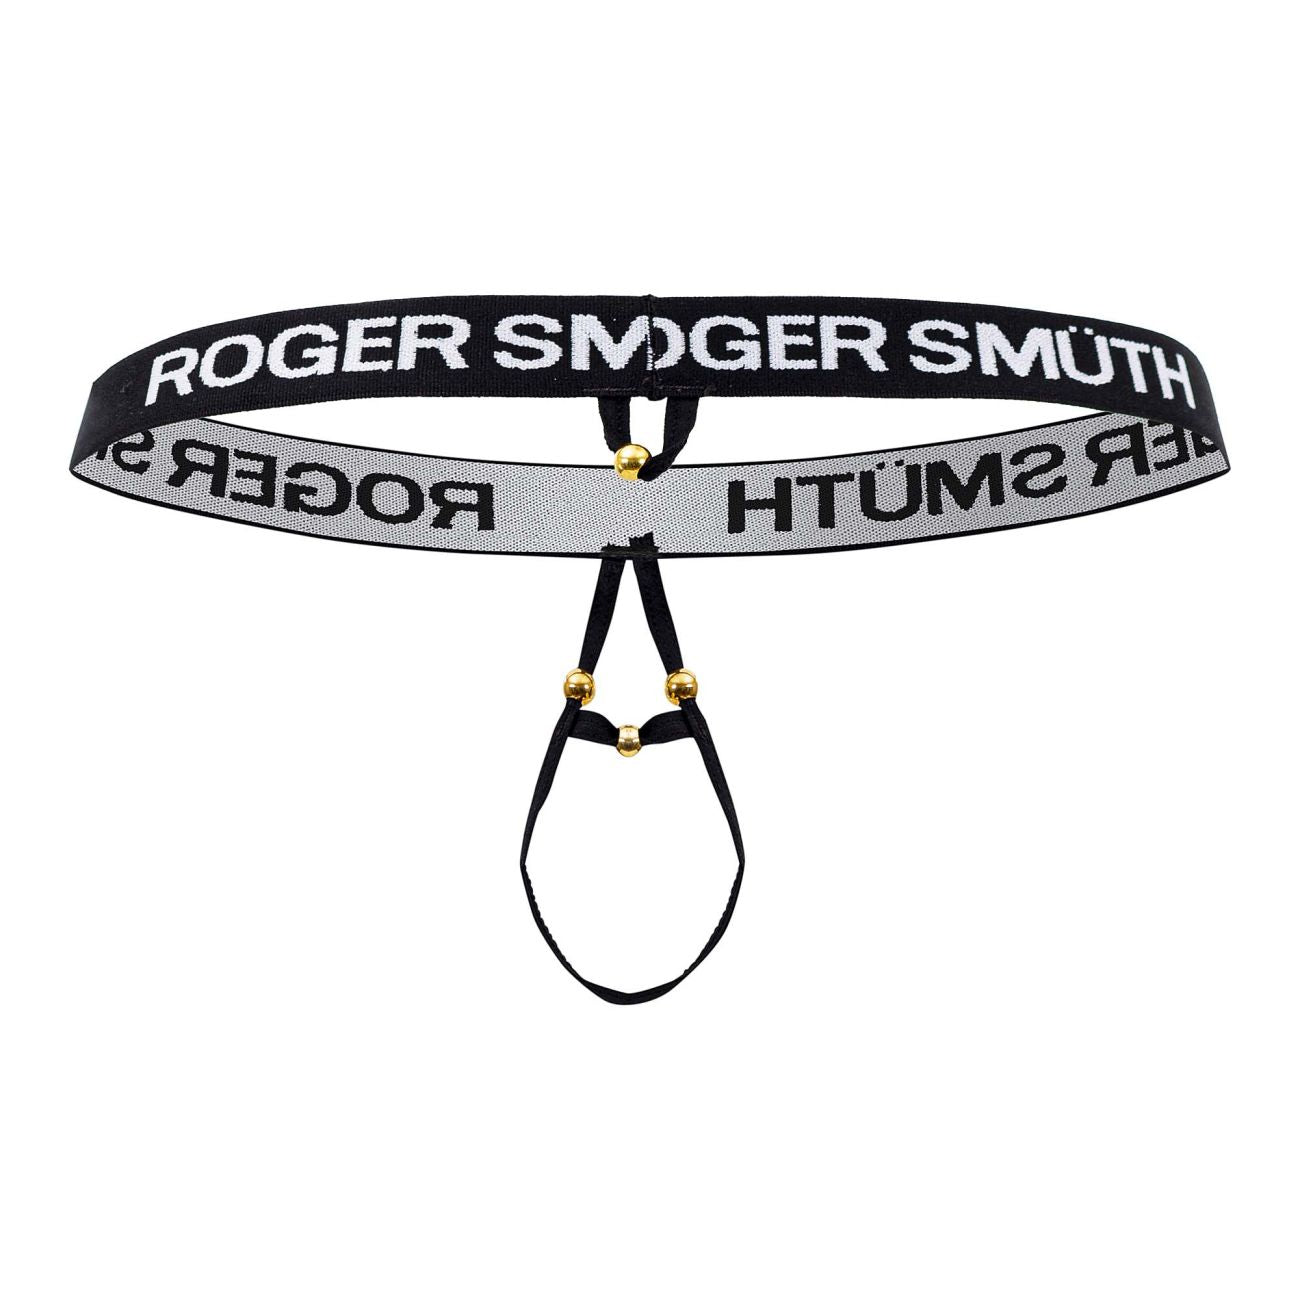 Roger Smuth RS089 Ball Lifter White